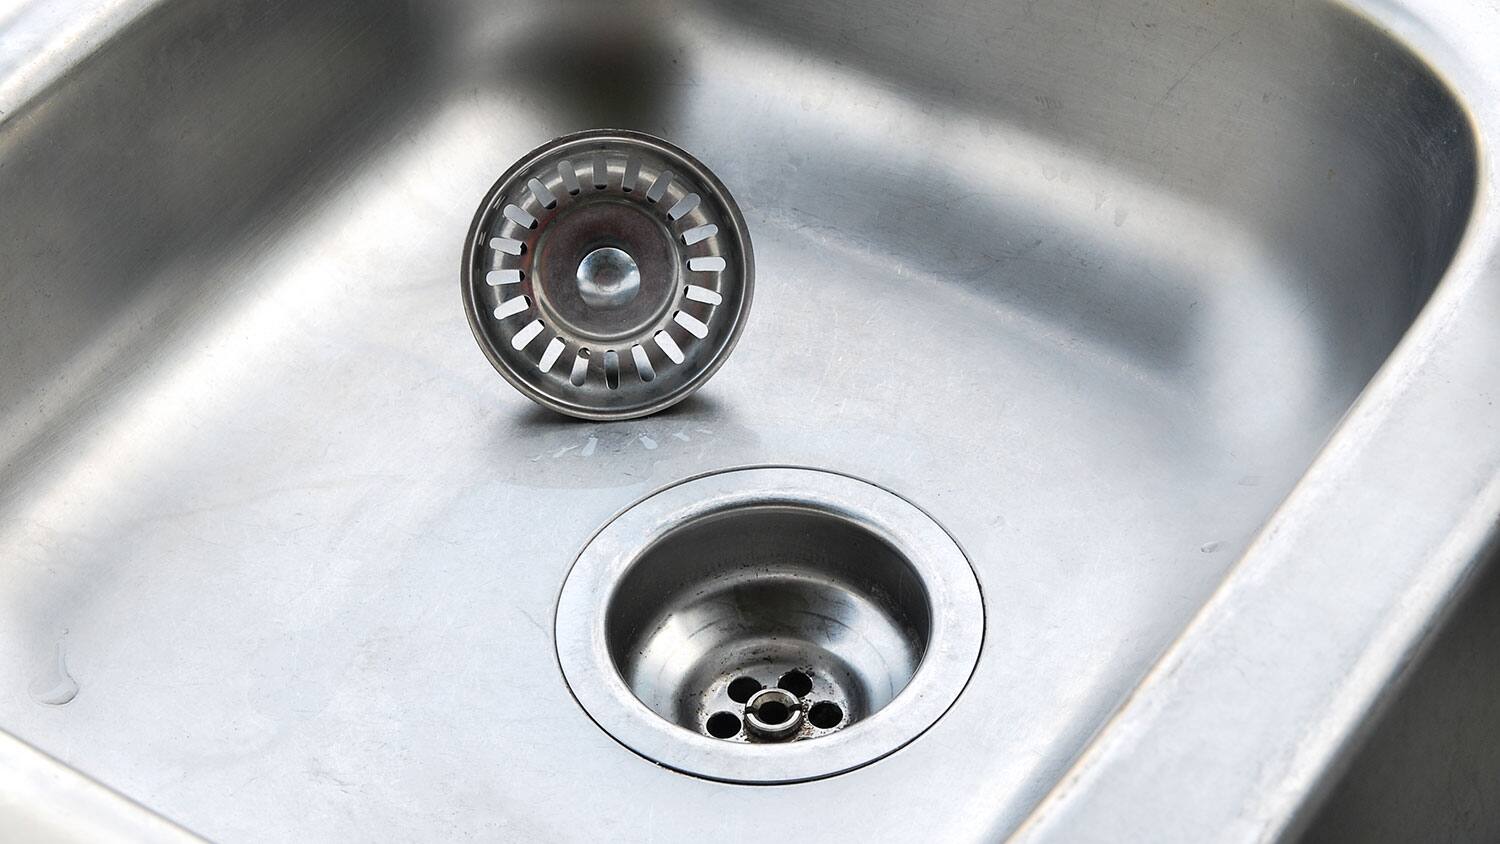 How To Remove A Drain From A Sink